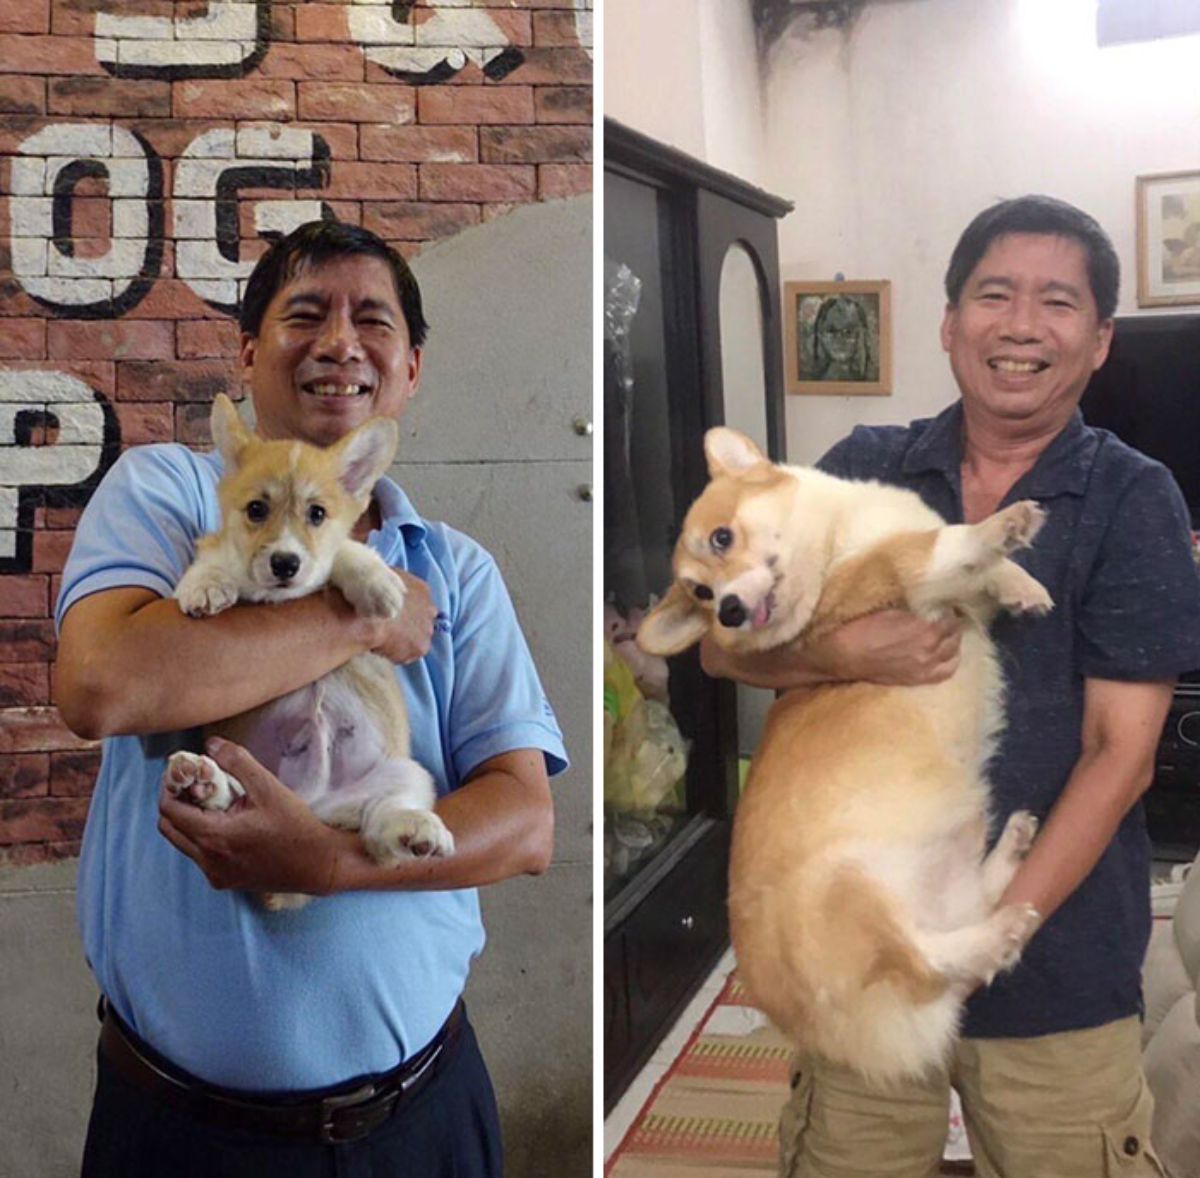 2 photos of a brown and white corgi being held by a man